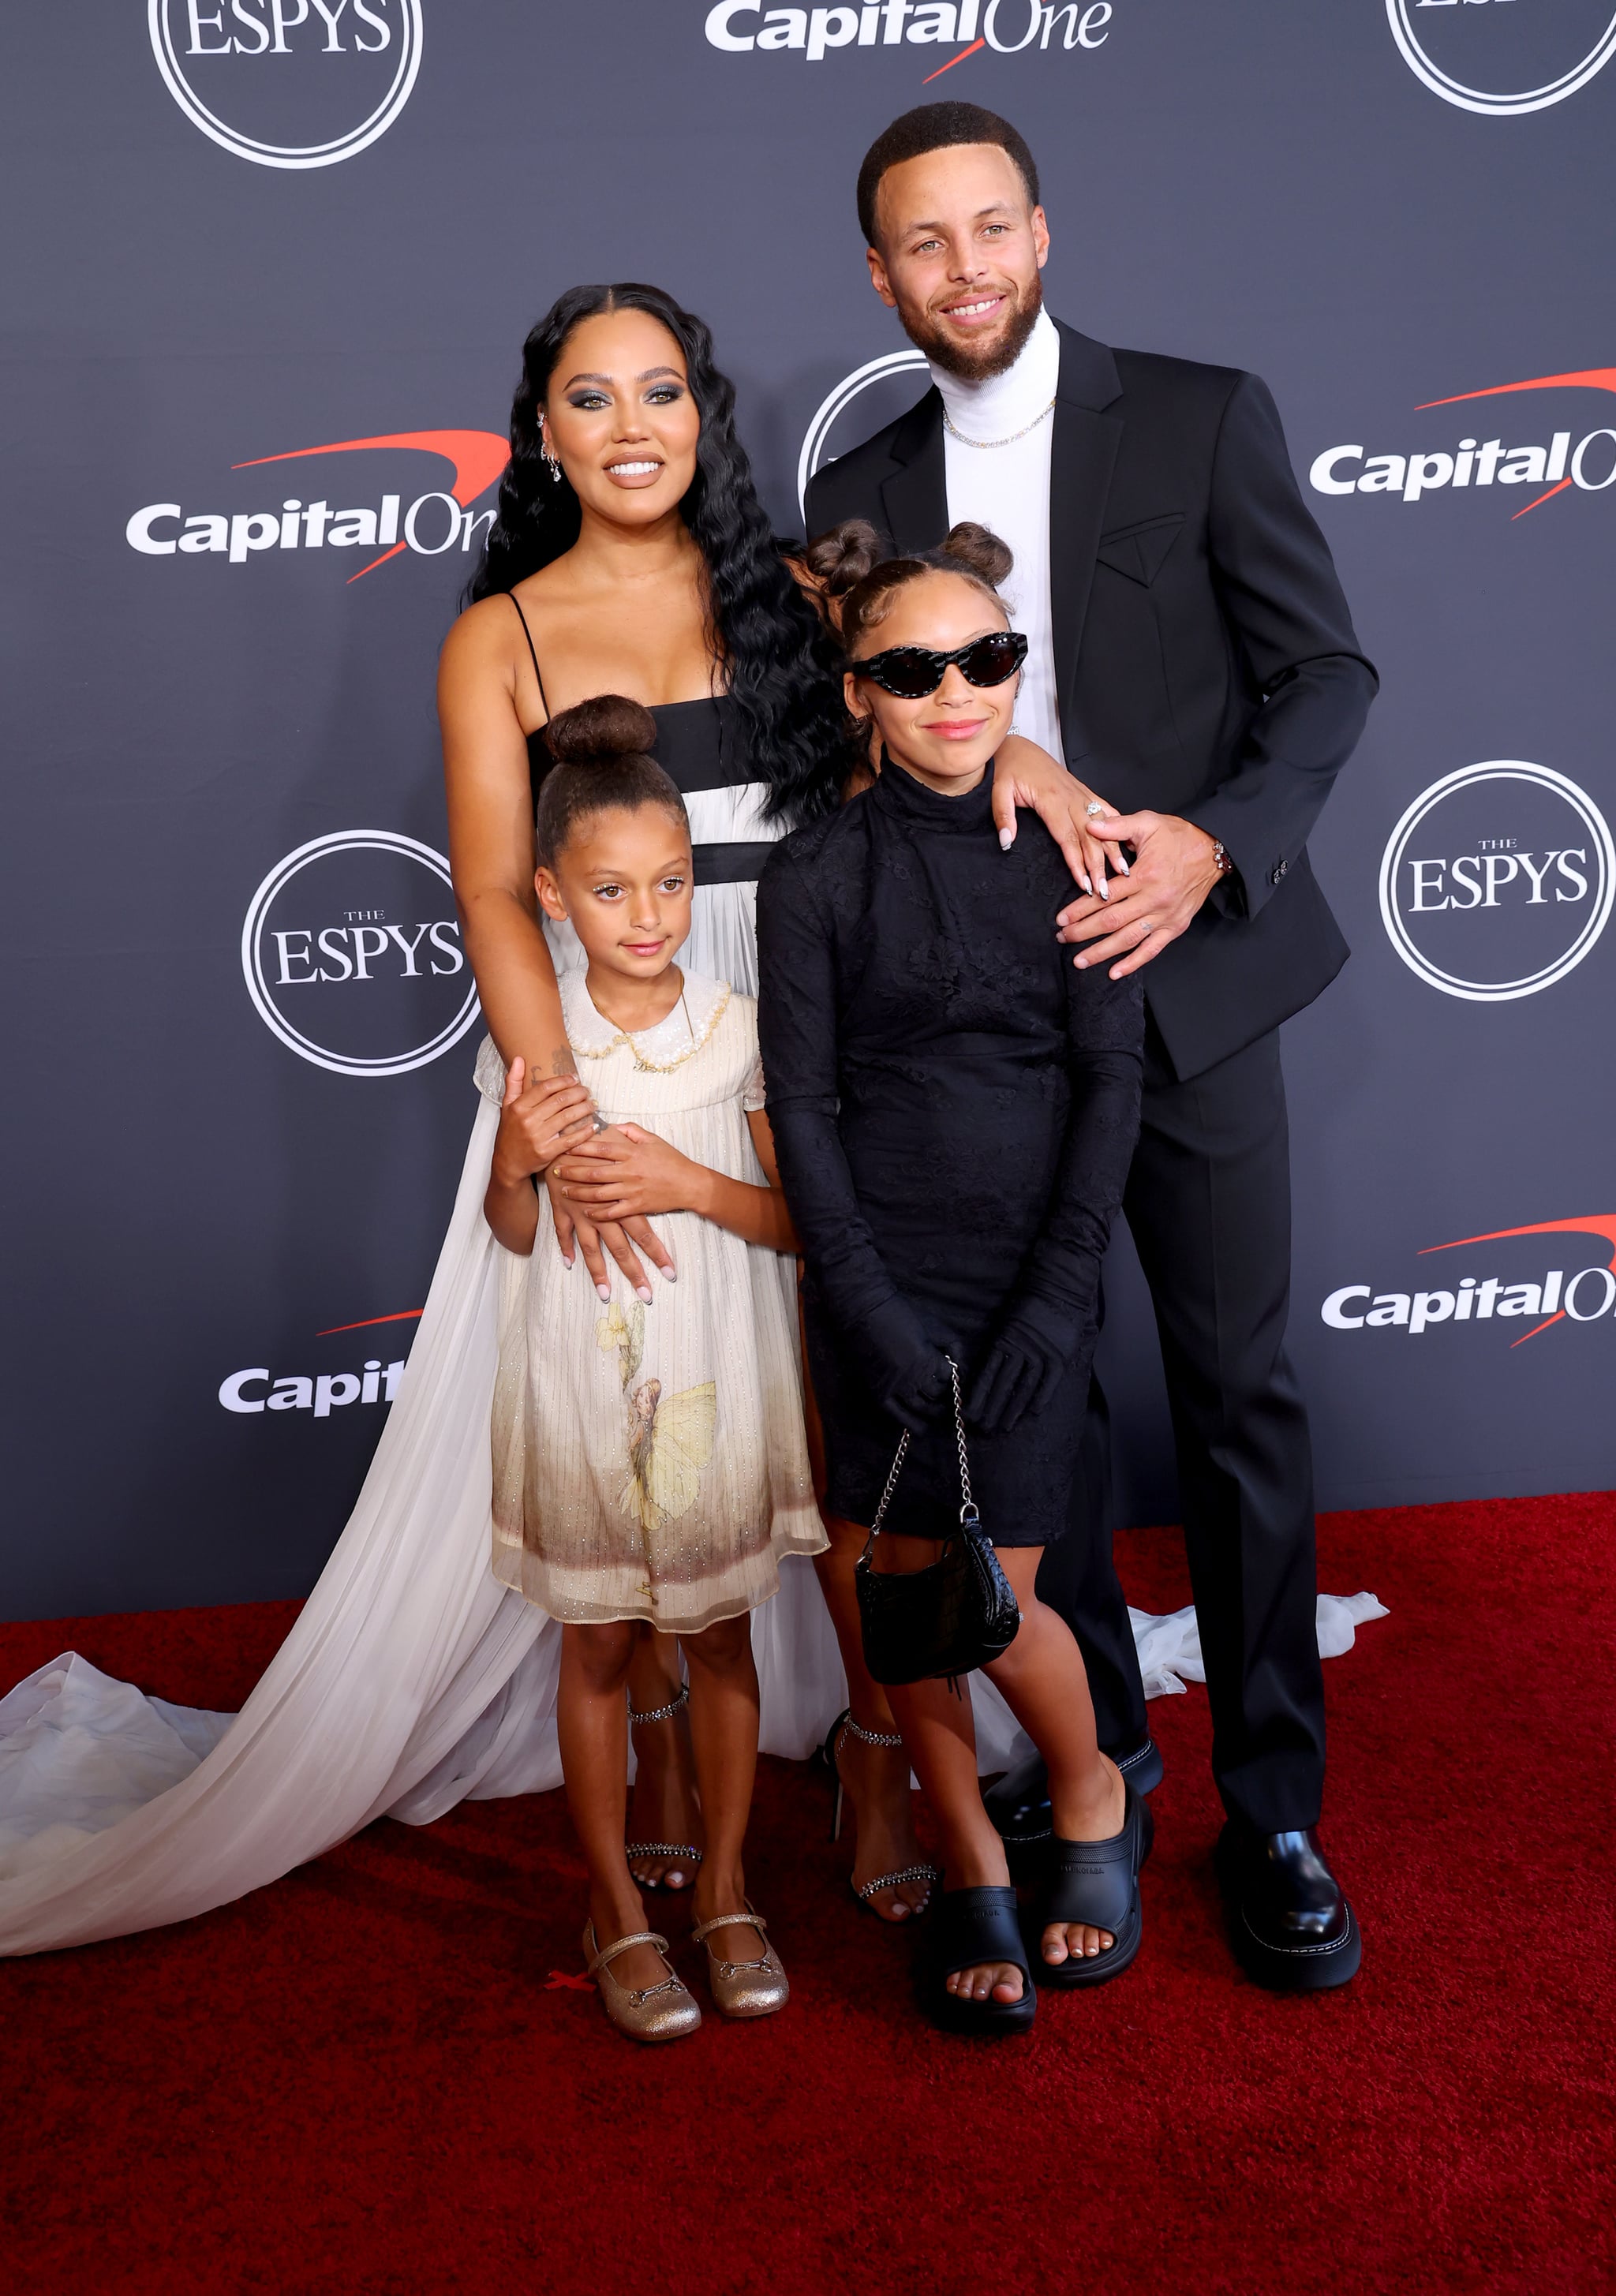 HOLLYWOOD, CALIFORNIA - JULY 20: (L-R) Ryan Carson Curry, Ayesha Curry, Riley Elizabeth Curry, and Stephen Curry attend the 2022 ESPYs at Dolby Theatre on July 20, 2022 in Hollywood, California. (Photo by Leon Bennett/Getty Images)